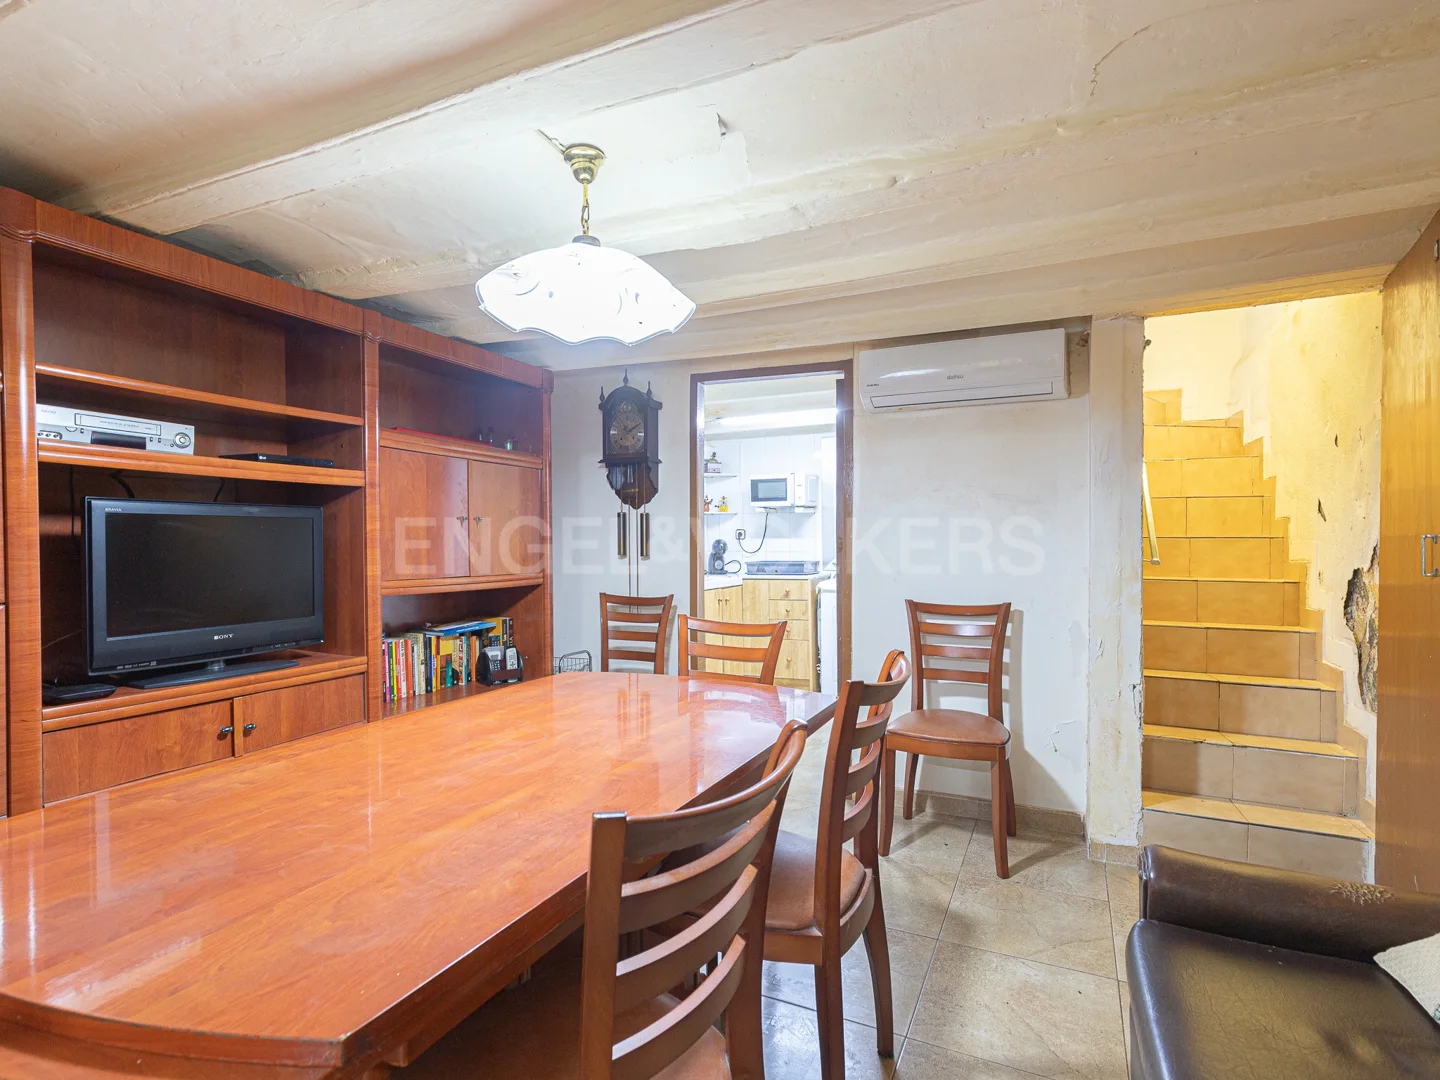 Duplex ideal for an investor in Raval